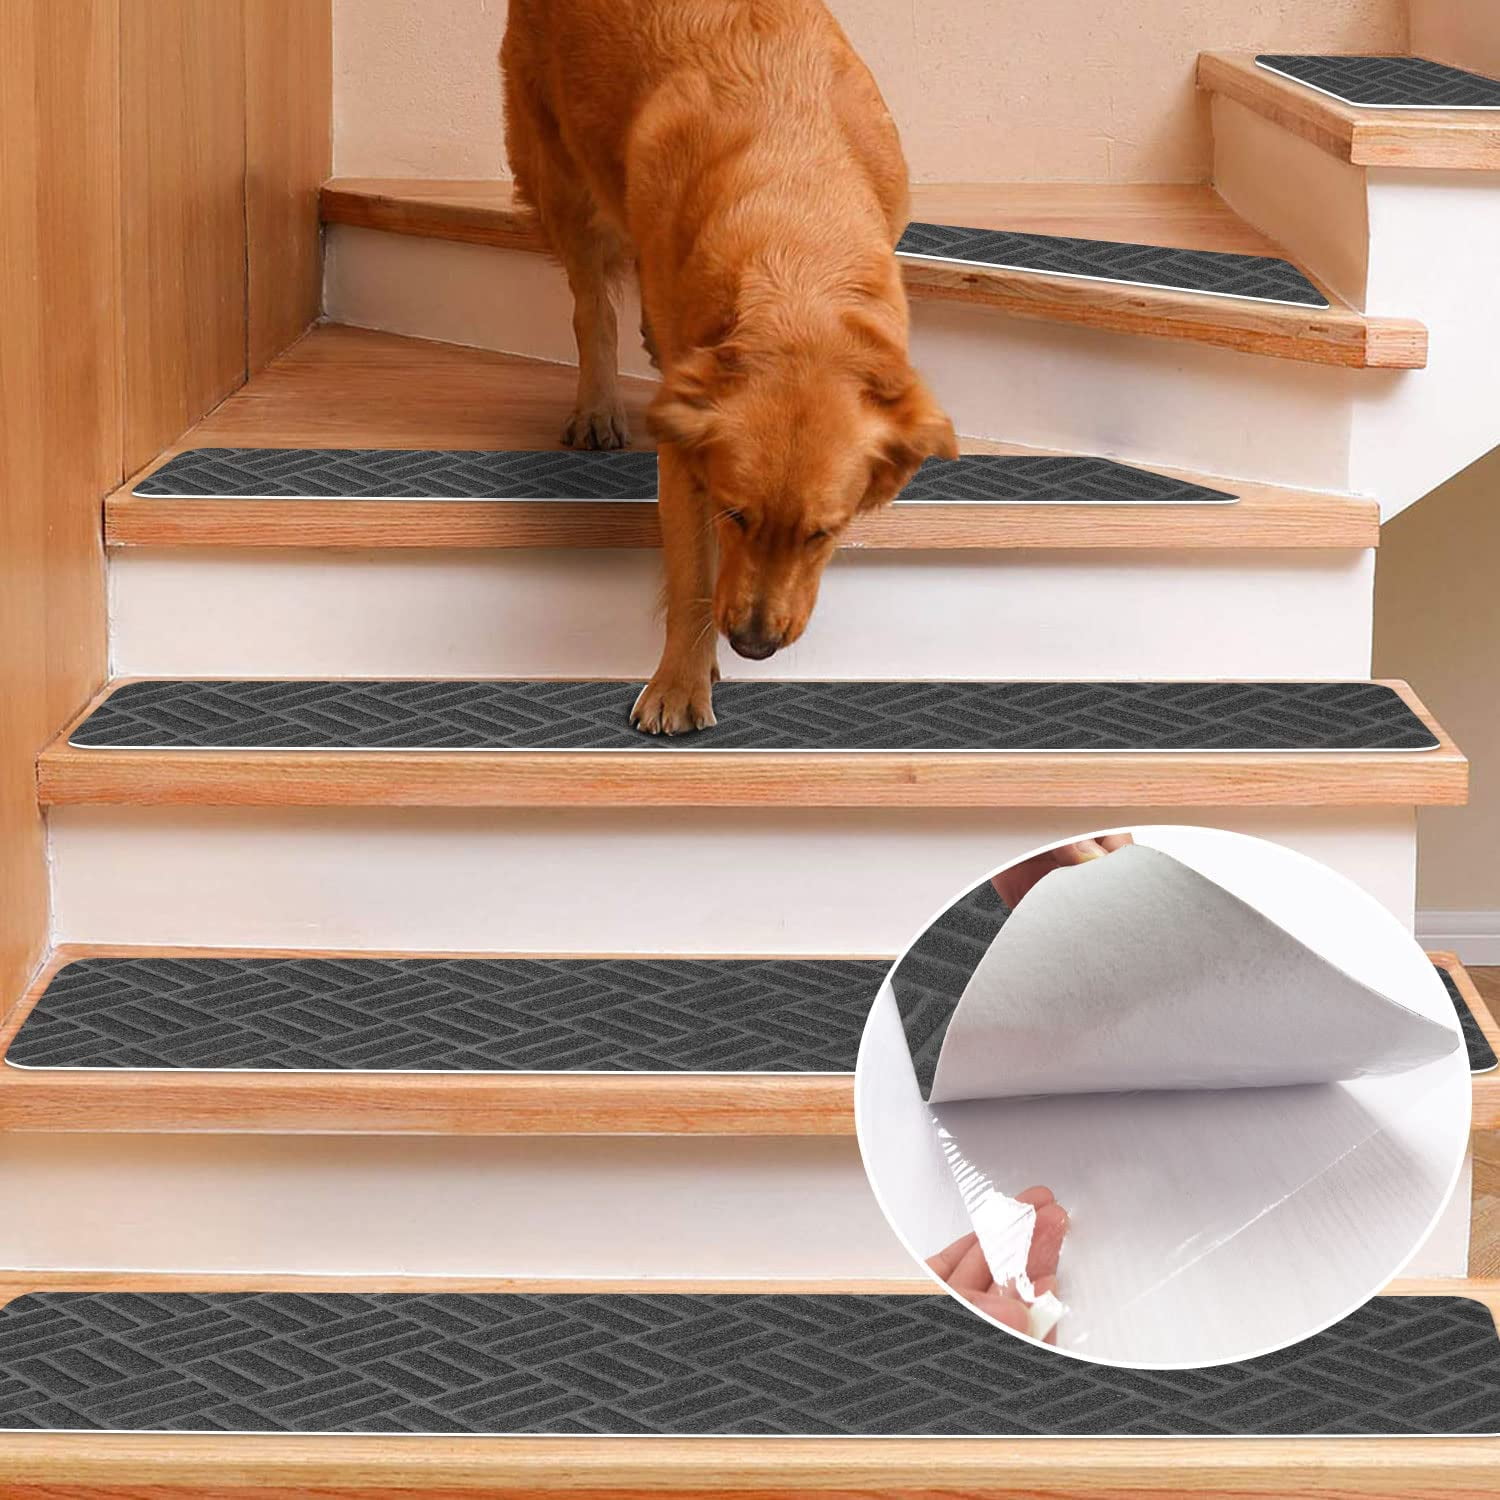 OJIA Extra Non-Slip Carpet Stair Treads for Wooden Steps, 30X8 Rubber  Indoor Stair Runner Slip Resistant Stair Rugs Safety Mats for Dogs, Kids 